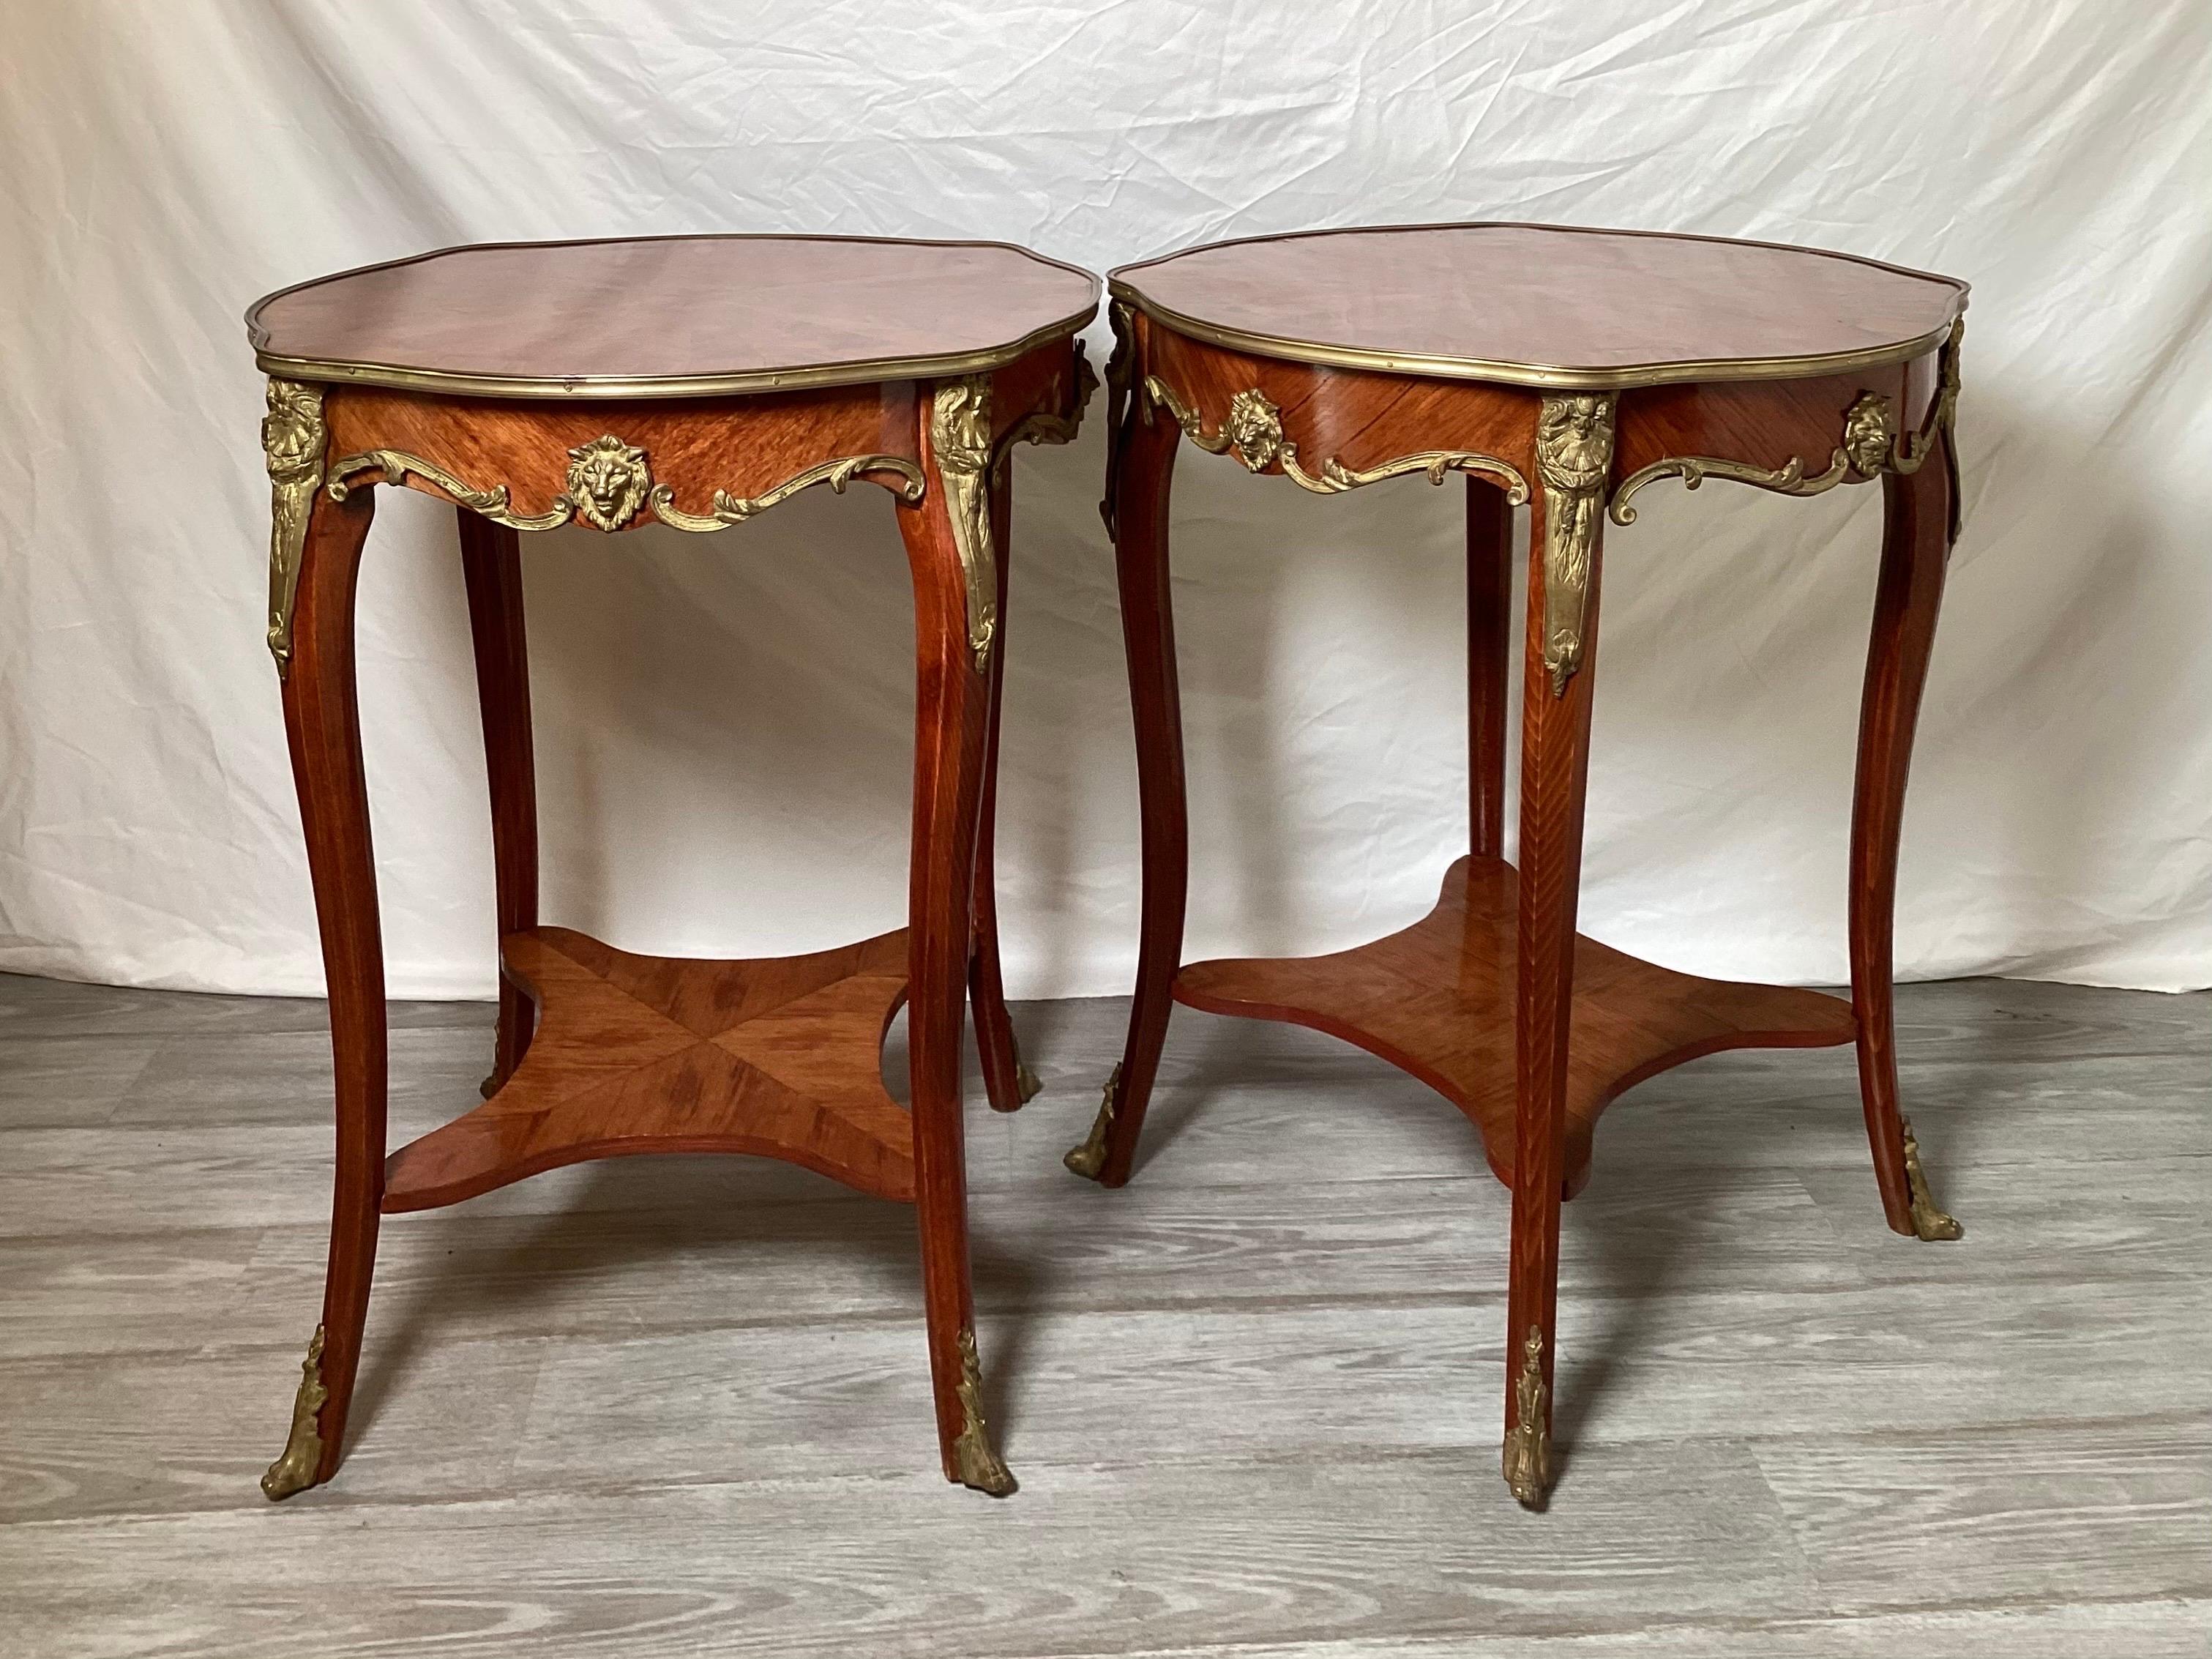 European Pair of Mid-20th Century Inlaid Louis XV Style Gueridon Lamp Tables For Sale